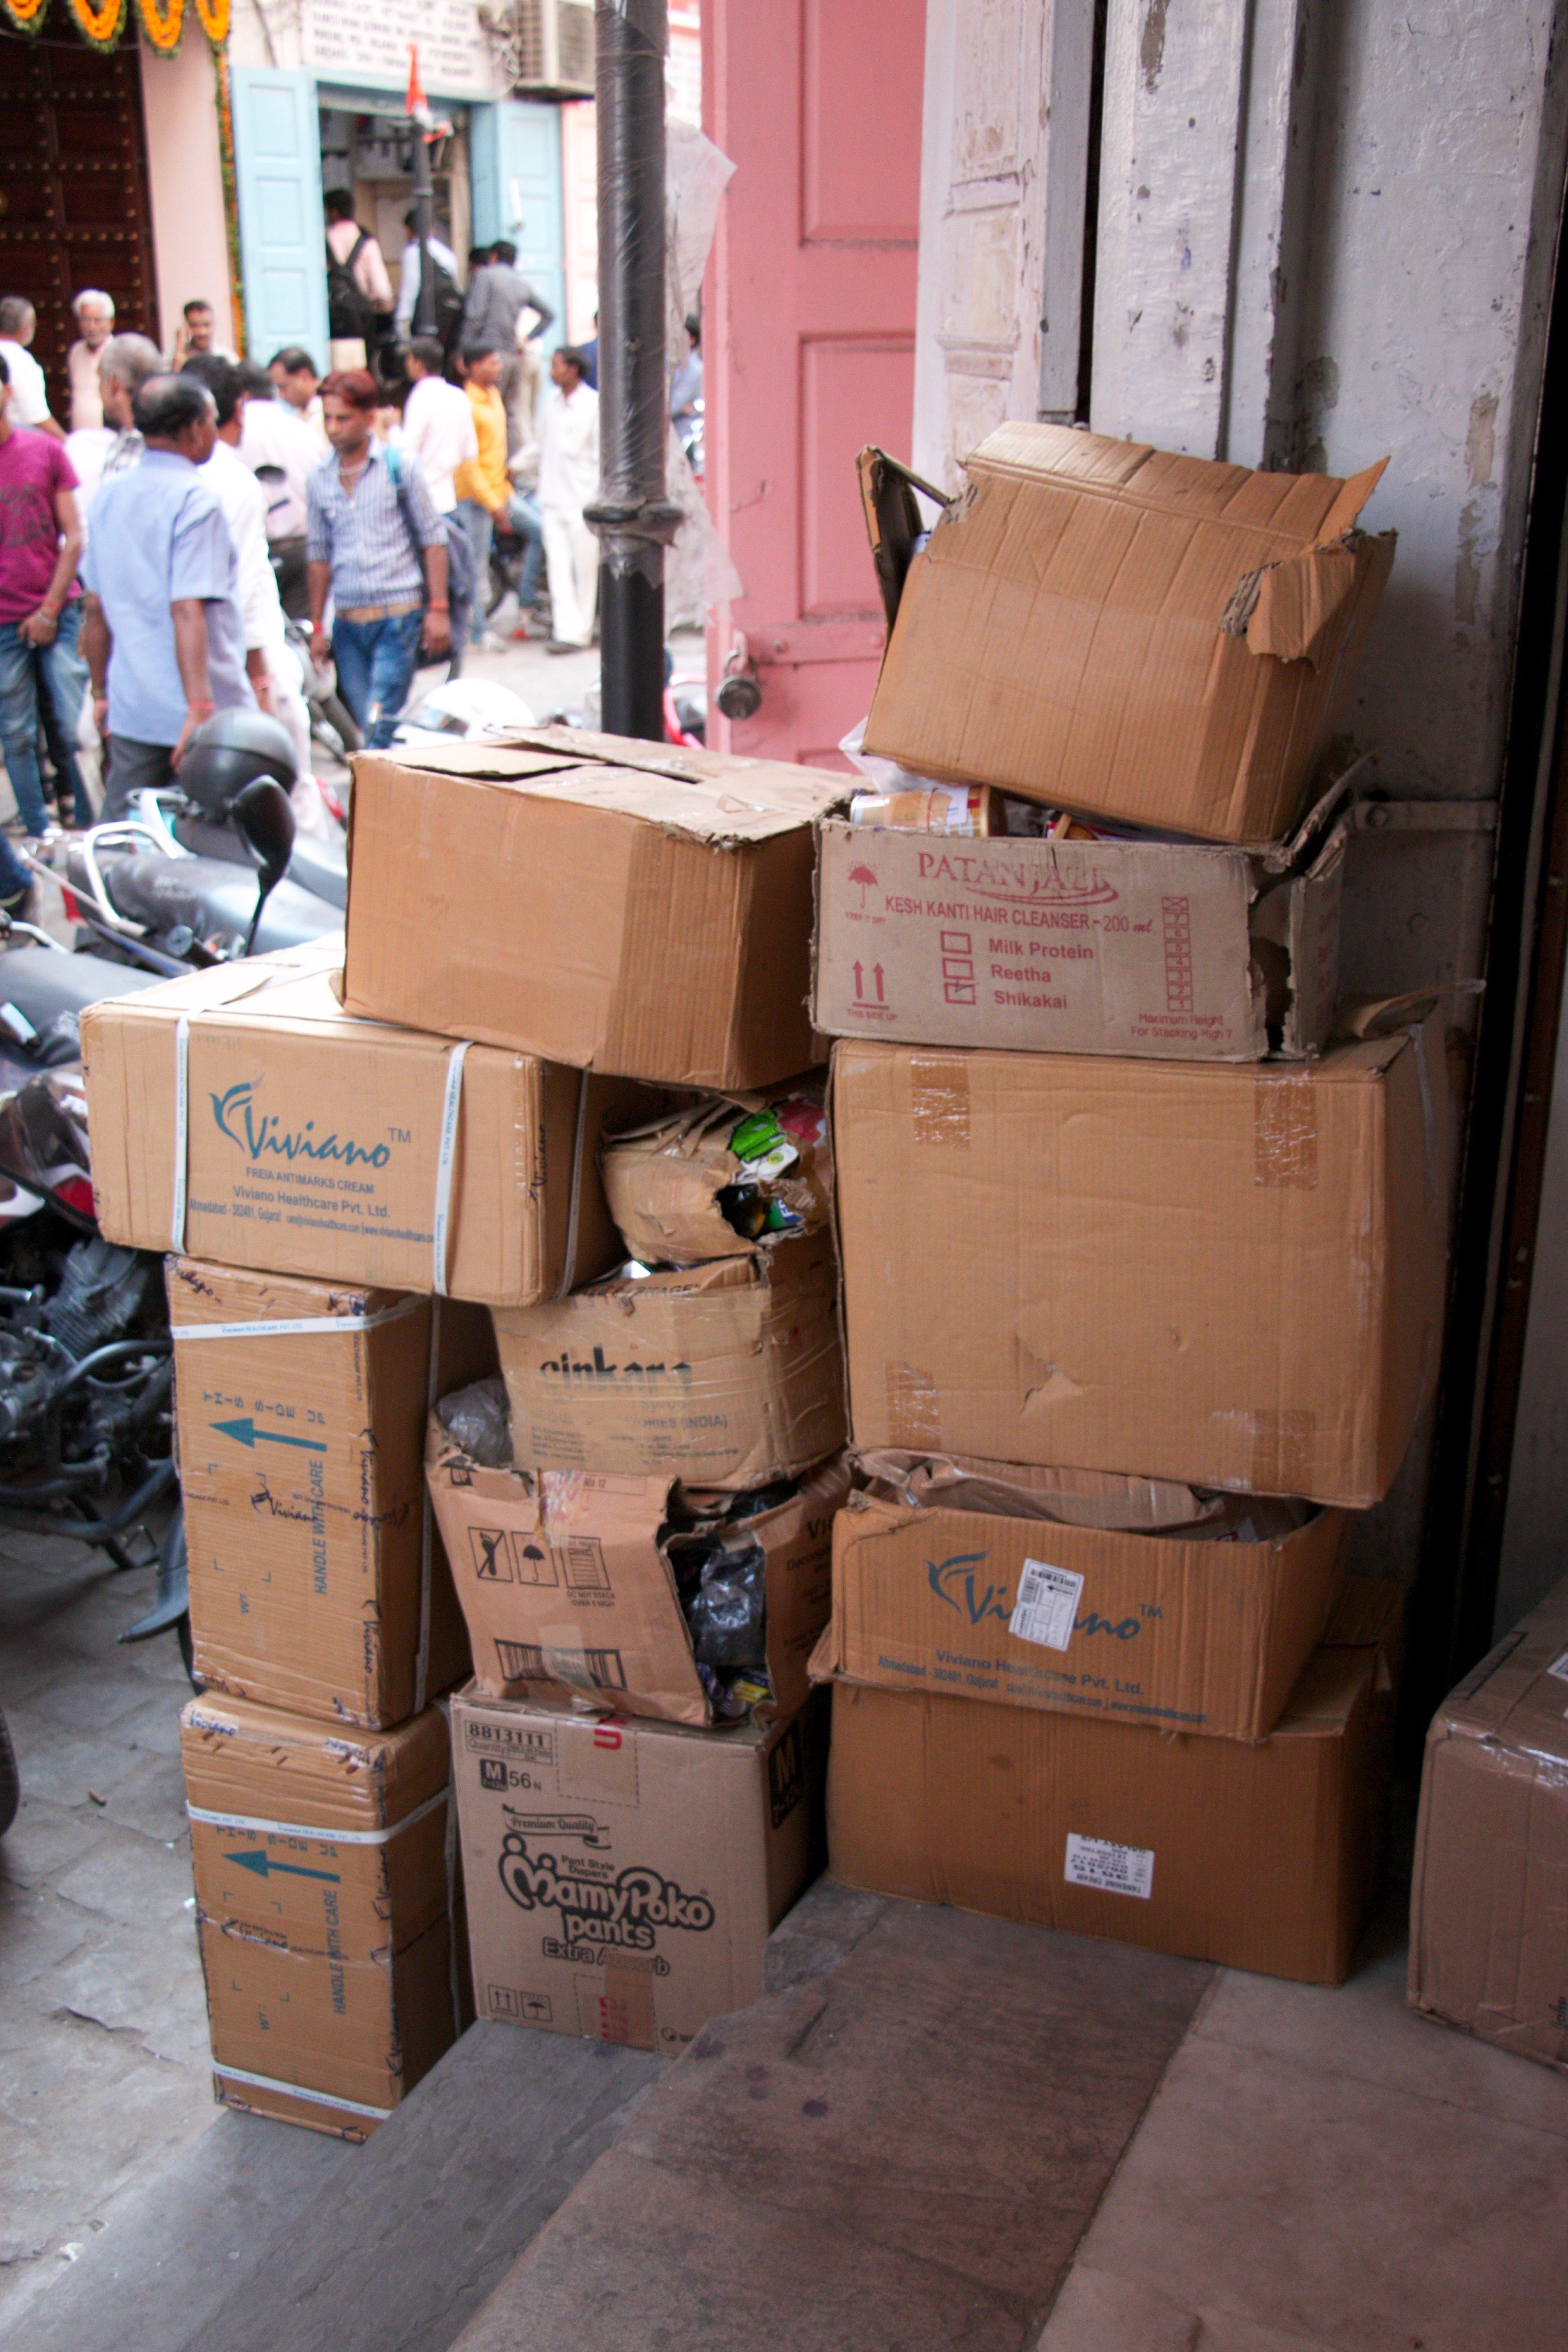 Boxes piled at the front of pharmacists.